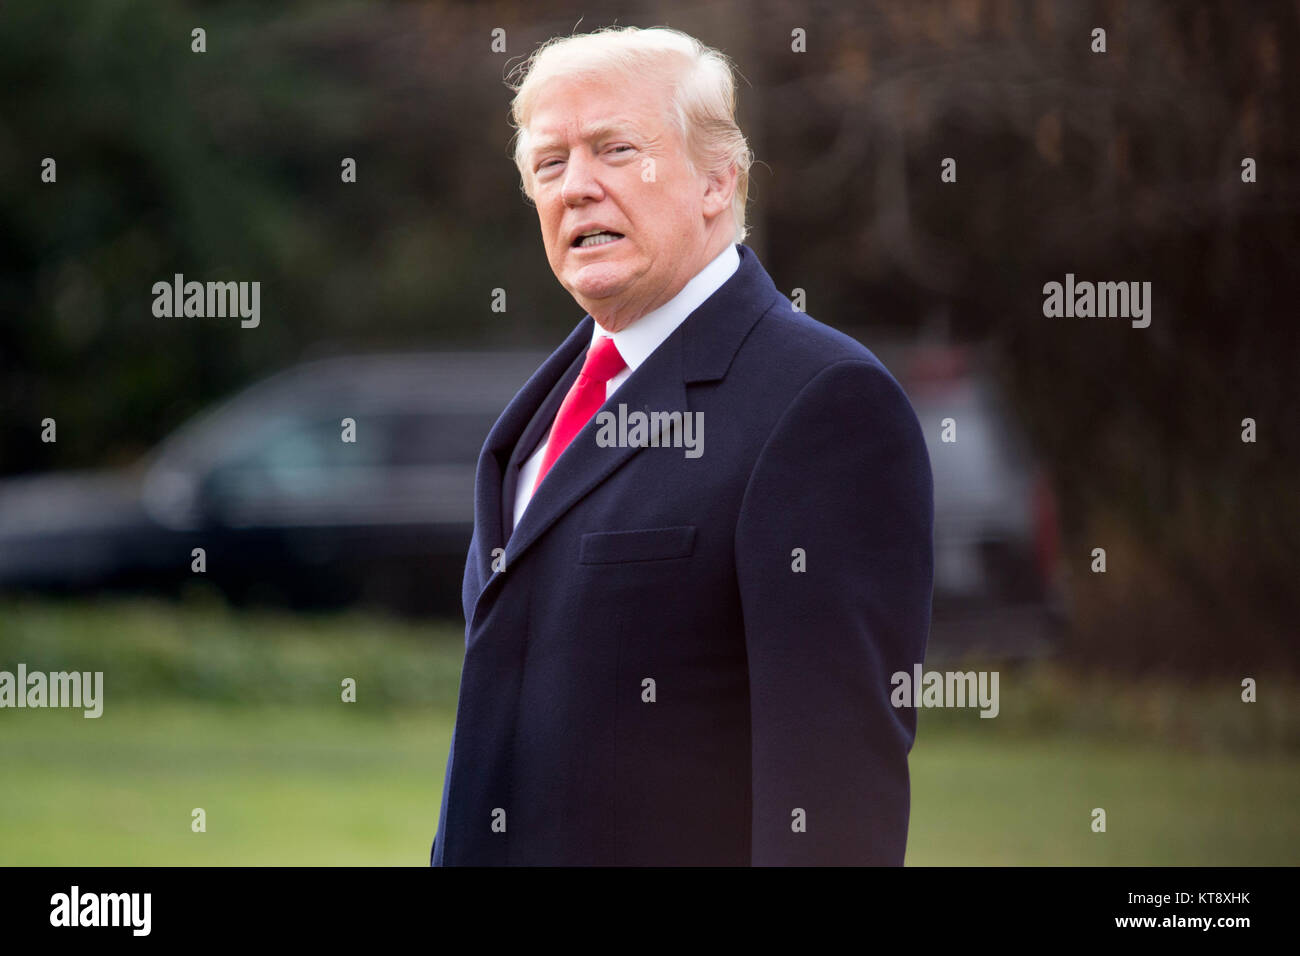 Washington, USA. 22nd Dec, 2017. President Donald Trump departs the White House for Palm Beach, FL where he will be spending the Christmas holiday, Friday, December 22, 2017. Credit: Michael Candelori/Alamy Live News Stock Photo